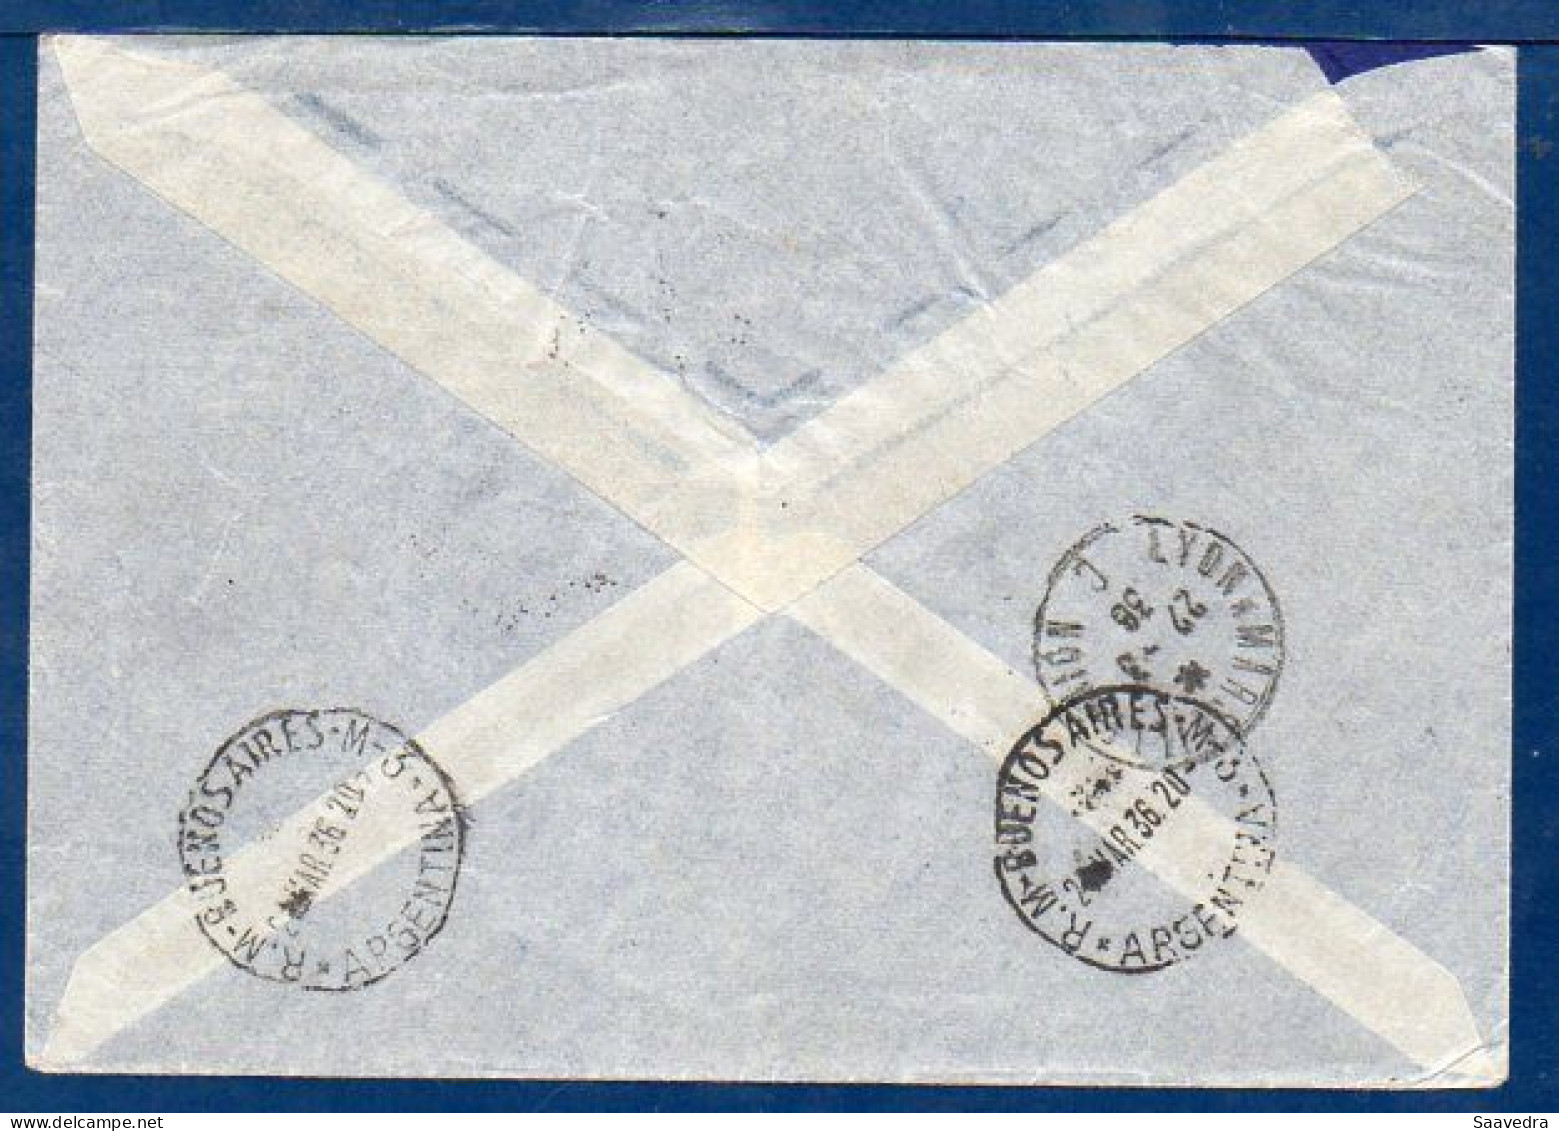 Switzerland To Argentina, 1936, Via Air France  (008) - Airmail